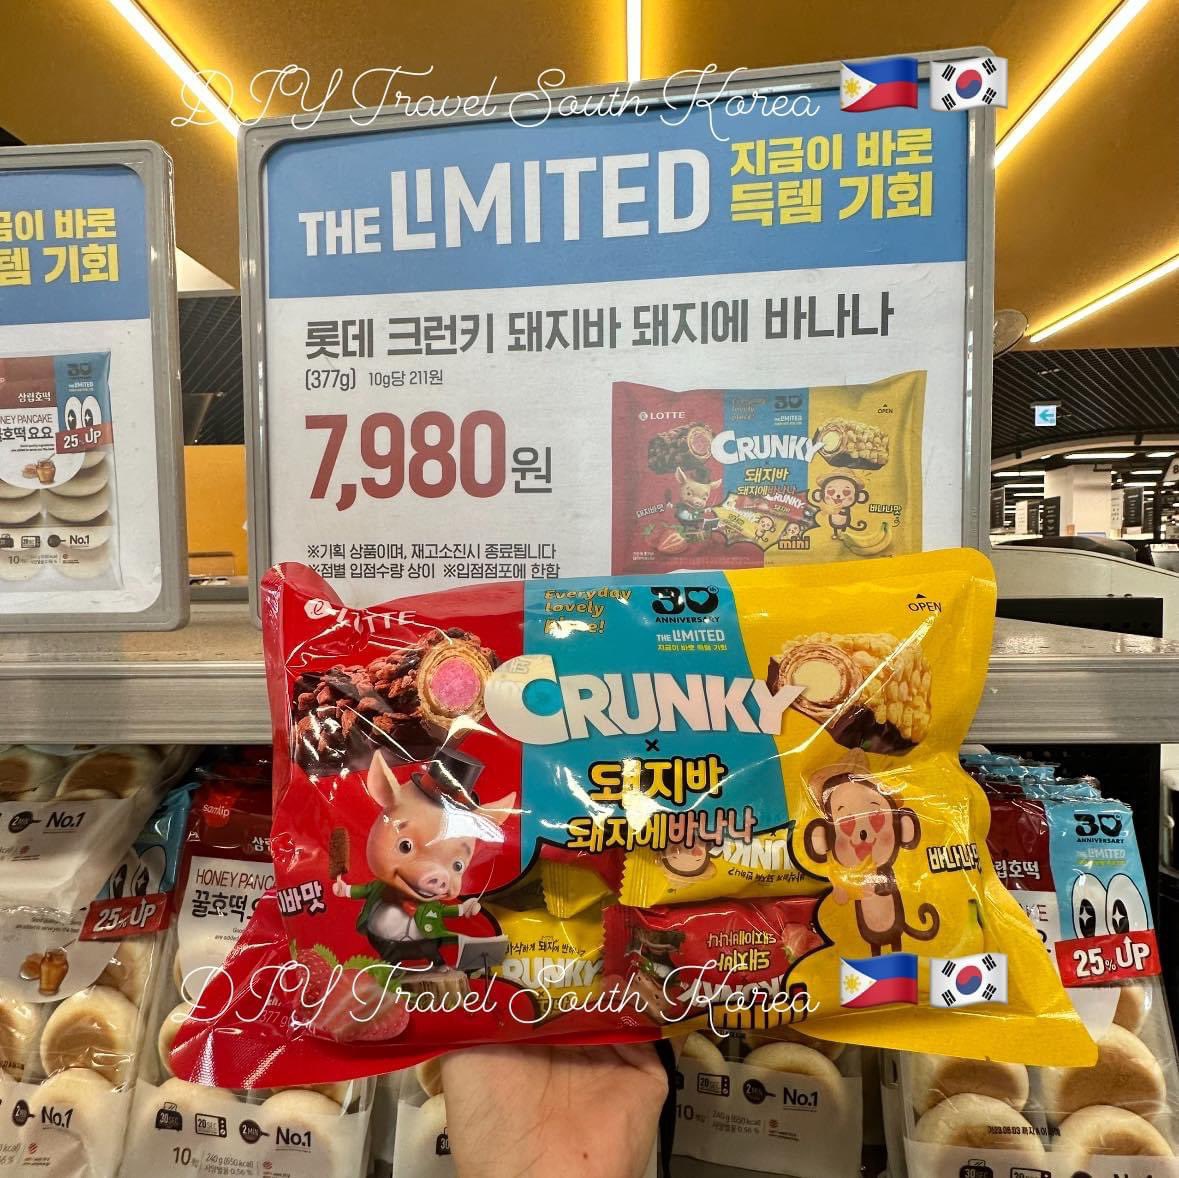 Check Emart and buy snacks for your family and friends🇰🇷✅
Also look for discounted price, 1+1 or 2+1.
Also don't forget the Free taste section😅😁

Traveling to South Korea?
Where to stay?
Explore below😍⬇️
bit.ly/m/Wheretostayi…

#seoul
#southkorea
#seoultravel
#SouthKorea2023